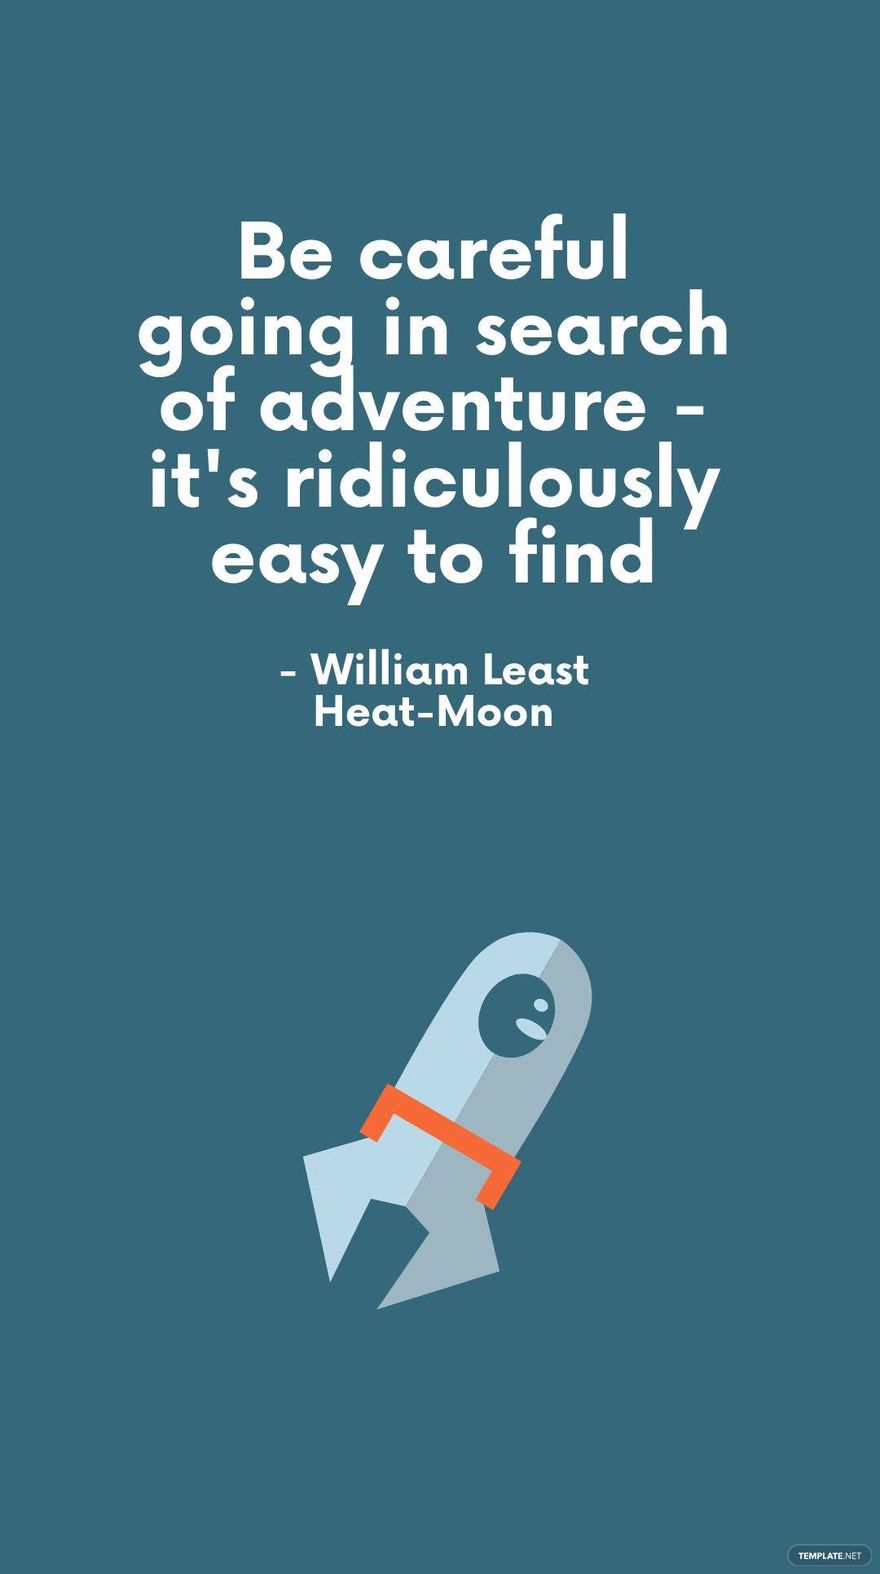 Free William Least Heat-Moon - Be careful going in search of adventure - it's ridiculously easy to find in JPG